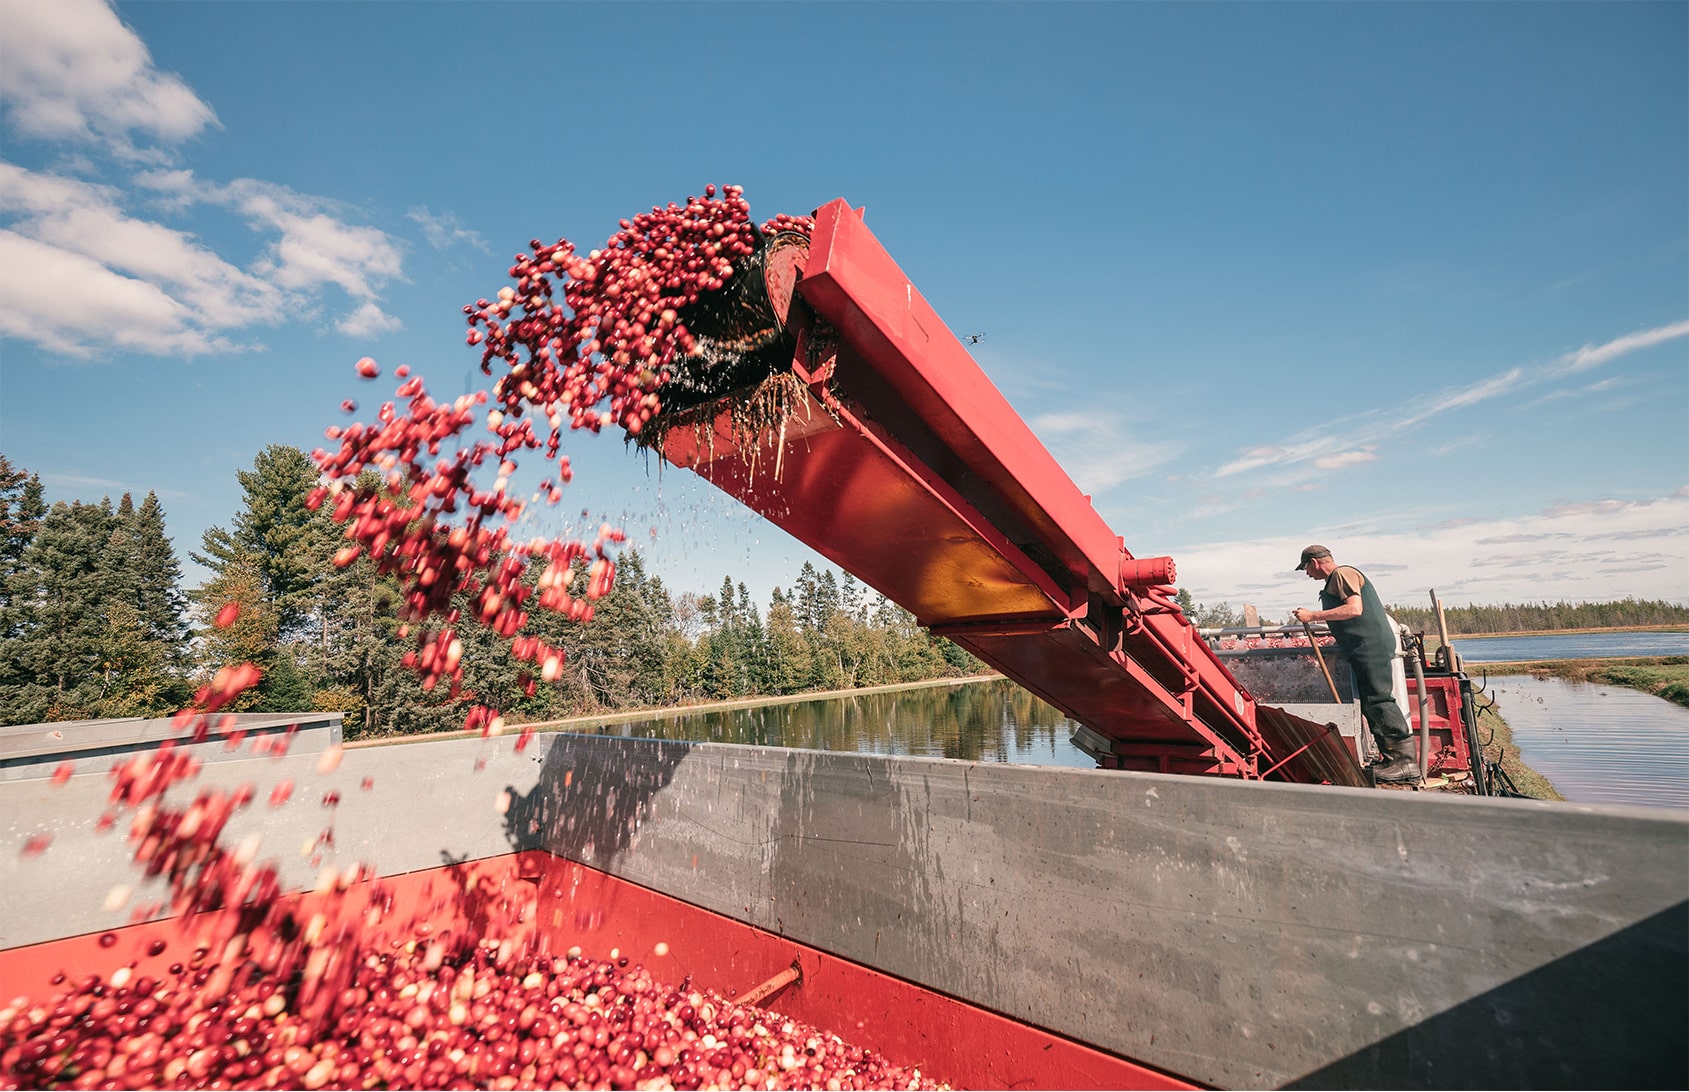 A person operates machinery to unload cranberries from a conveyor belt into a large container on a clear day near a wooded area and lake.